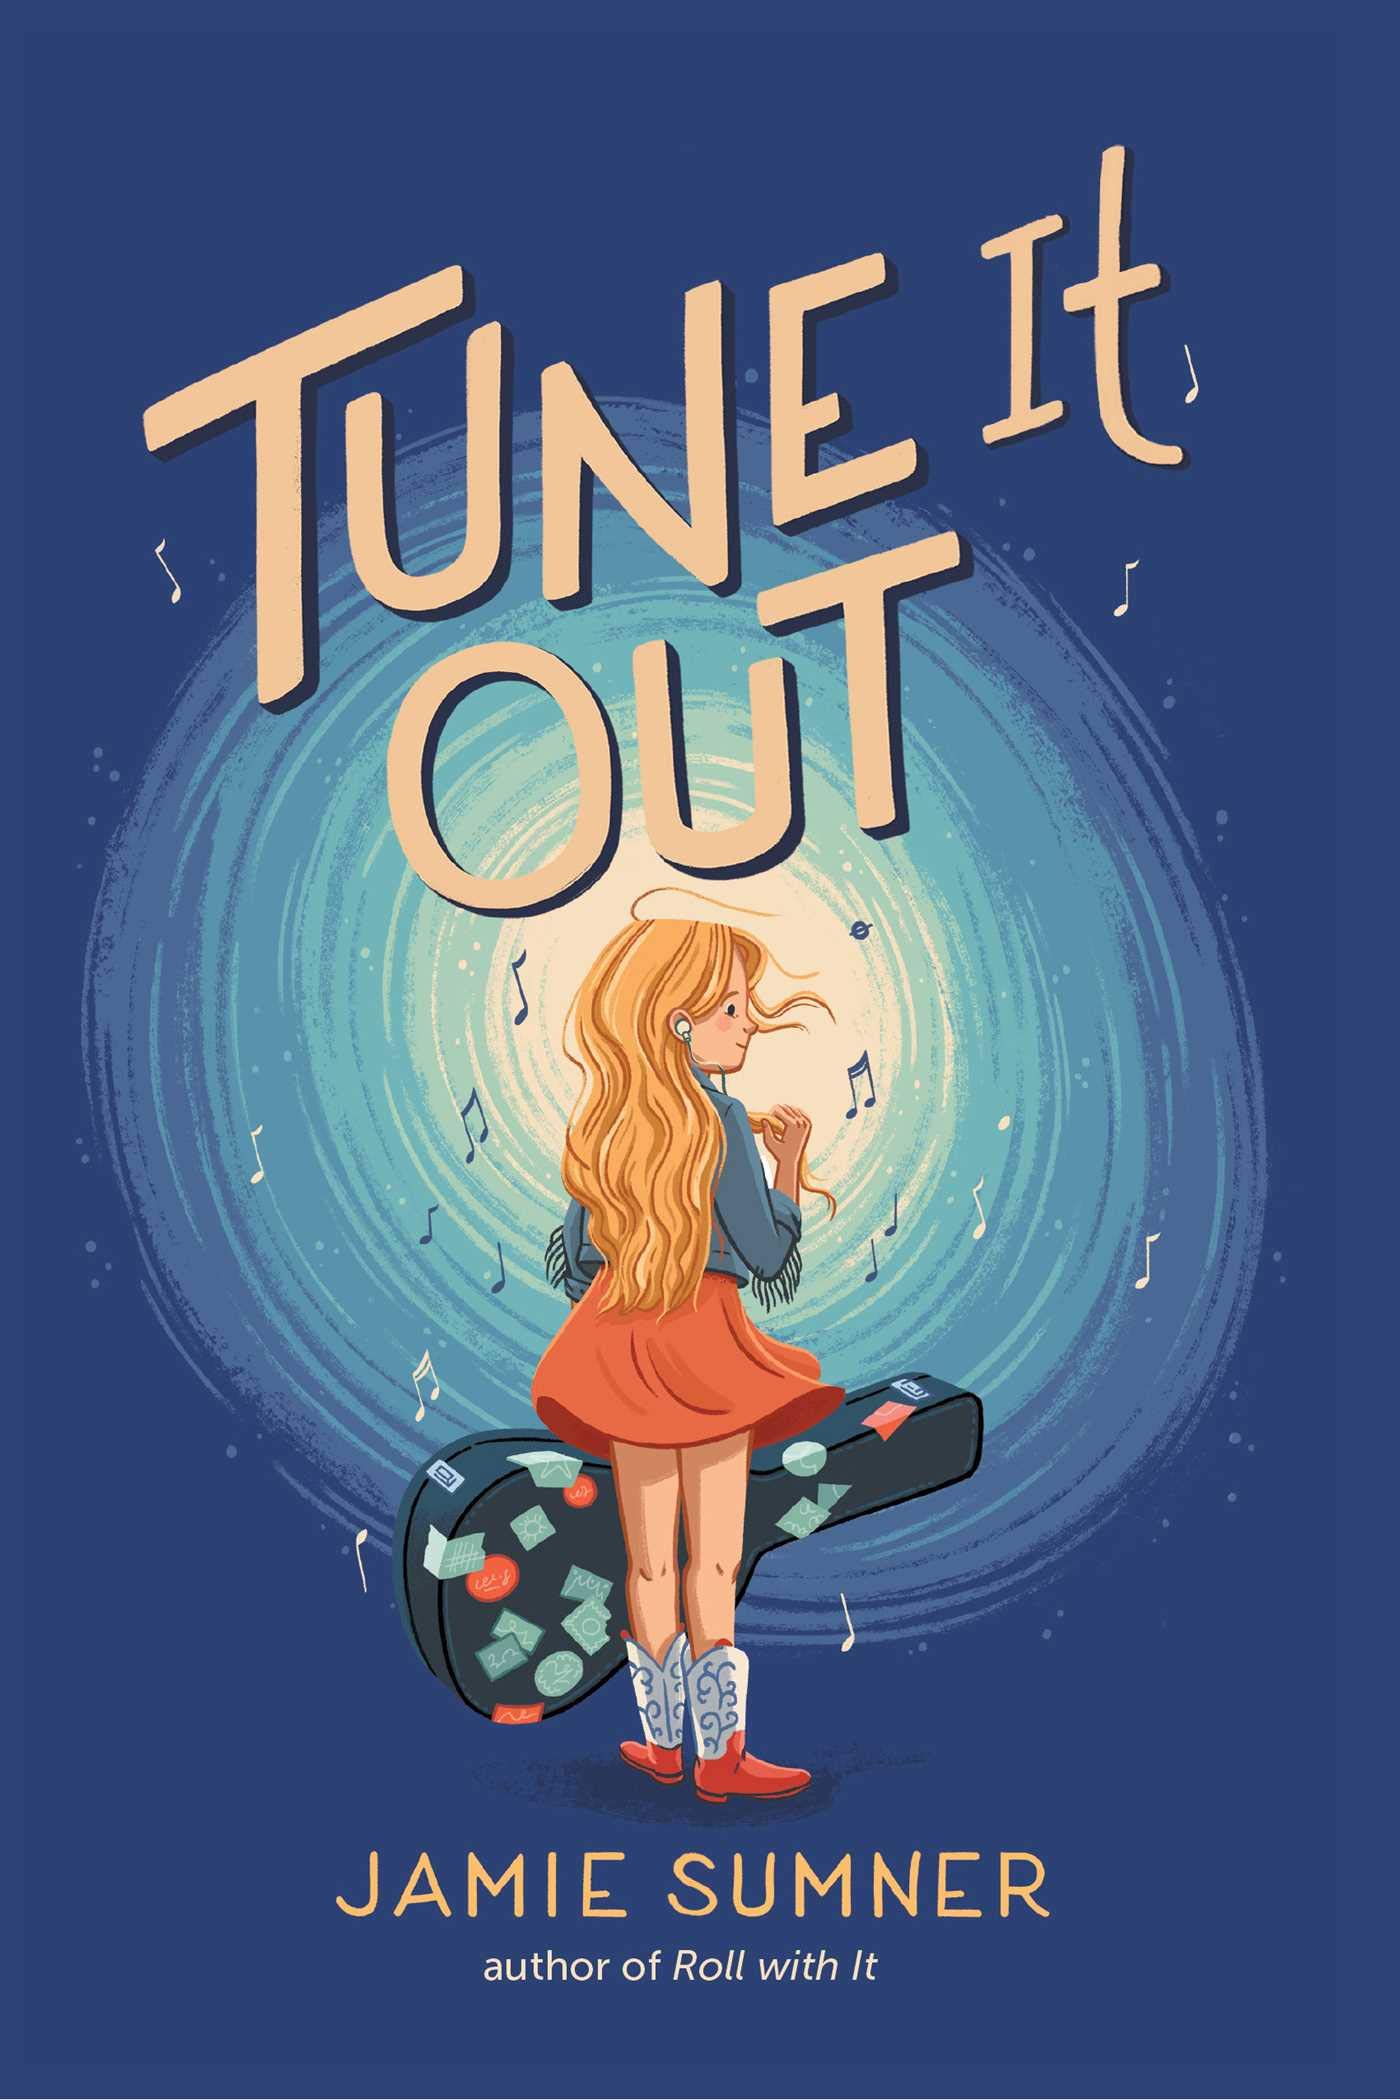 Tune it Out by Jamie Sumner